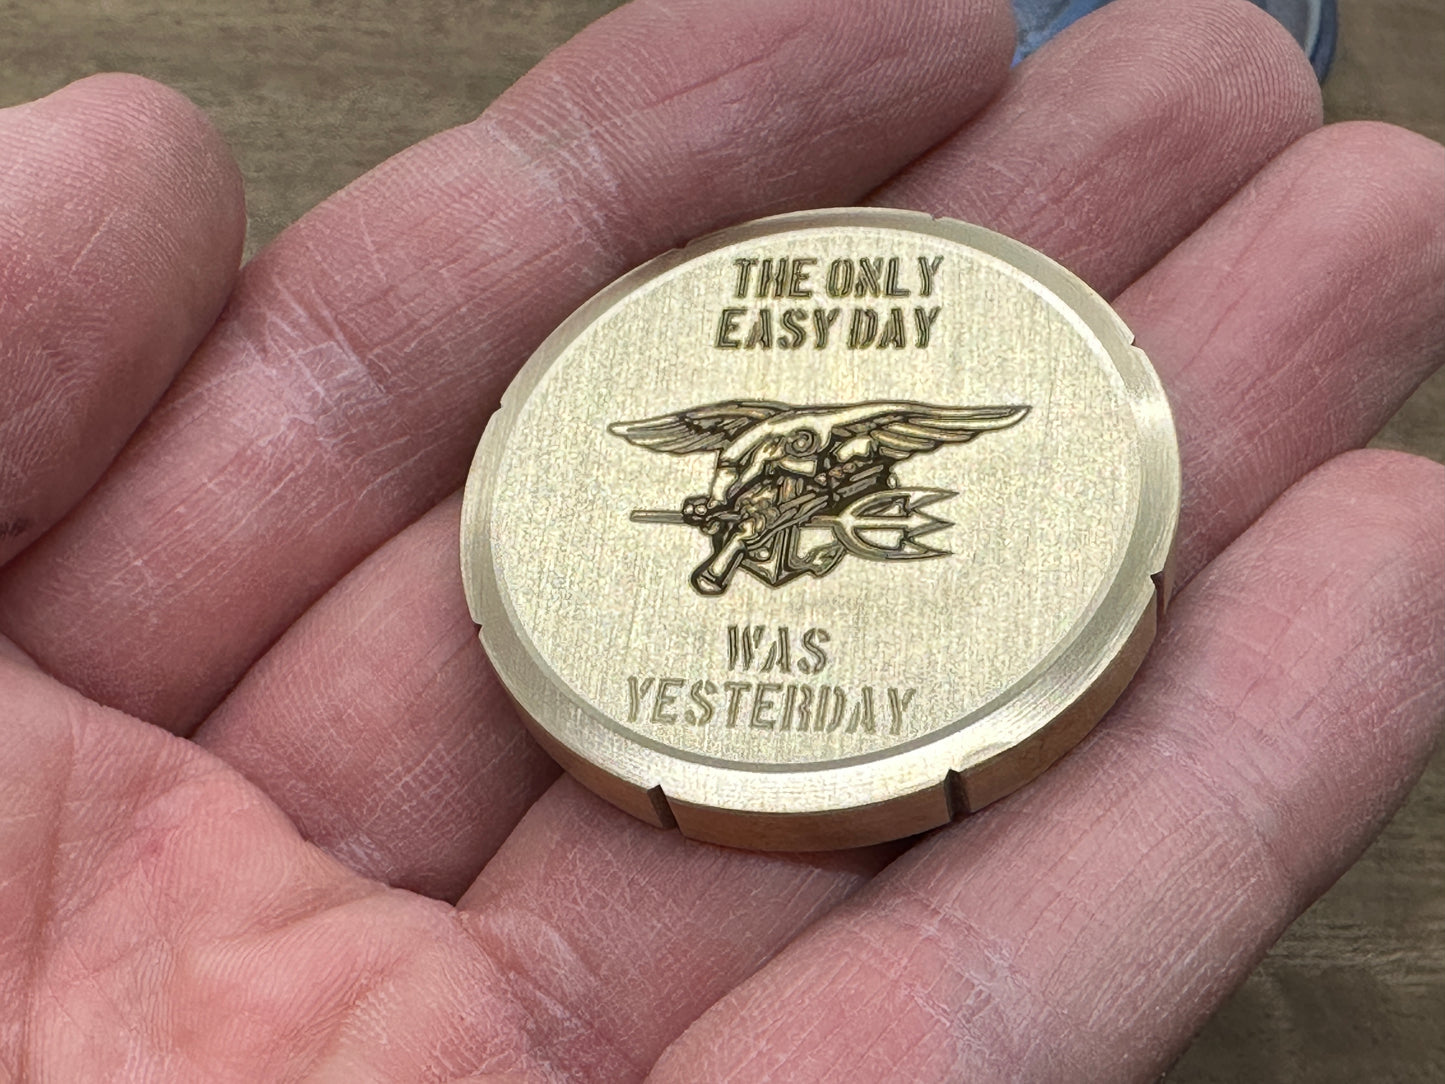 "The only easy day was yesterday.” Brass Spinning Worry Coin Spinning Top